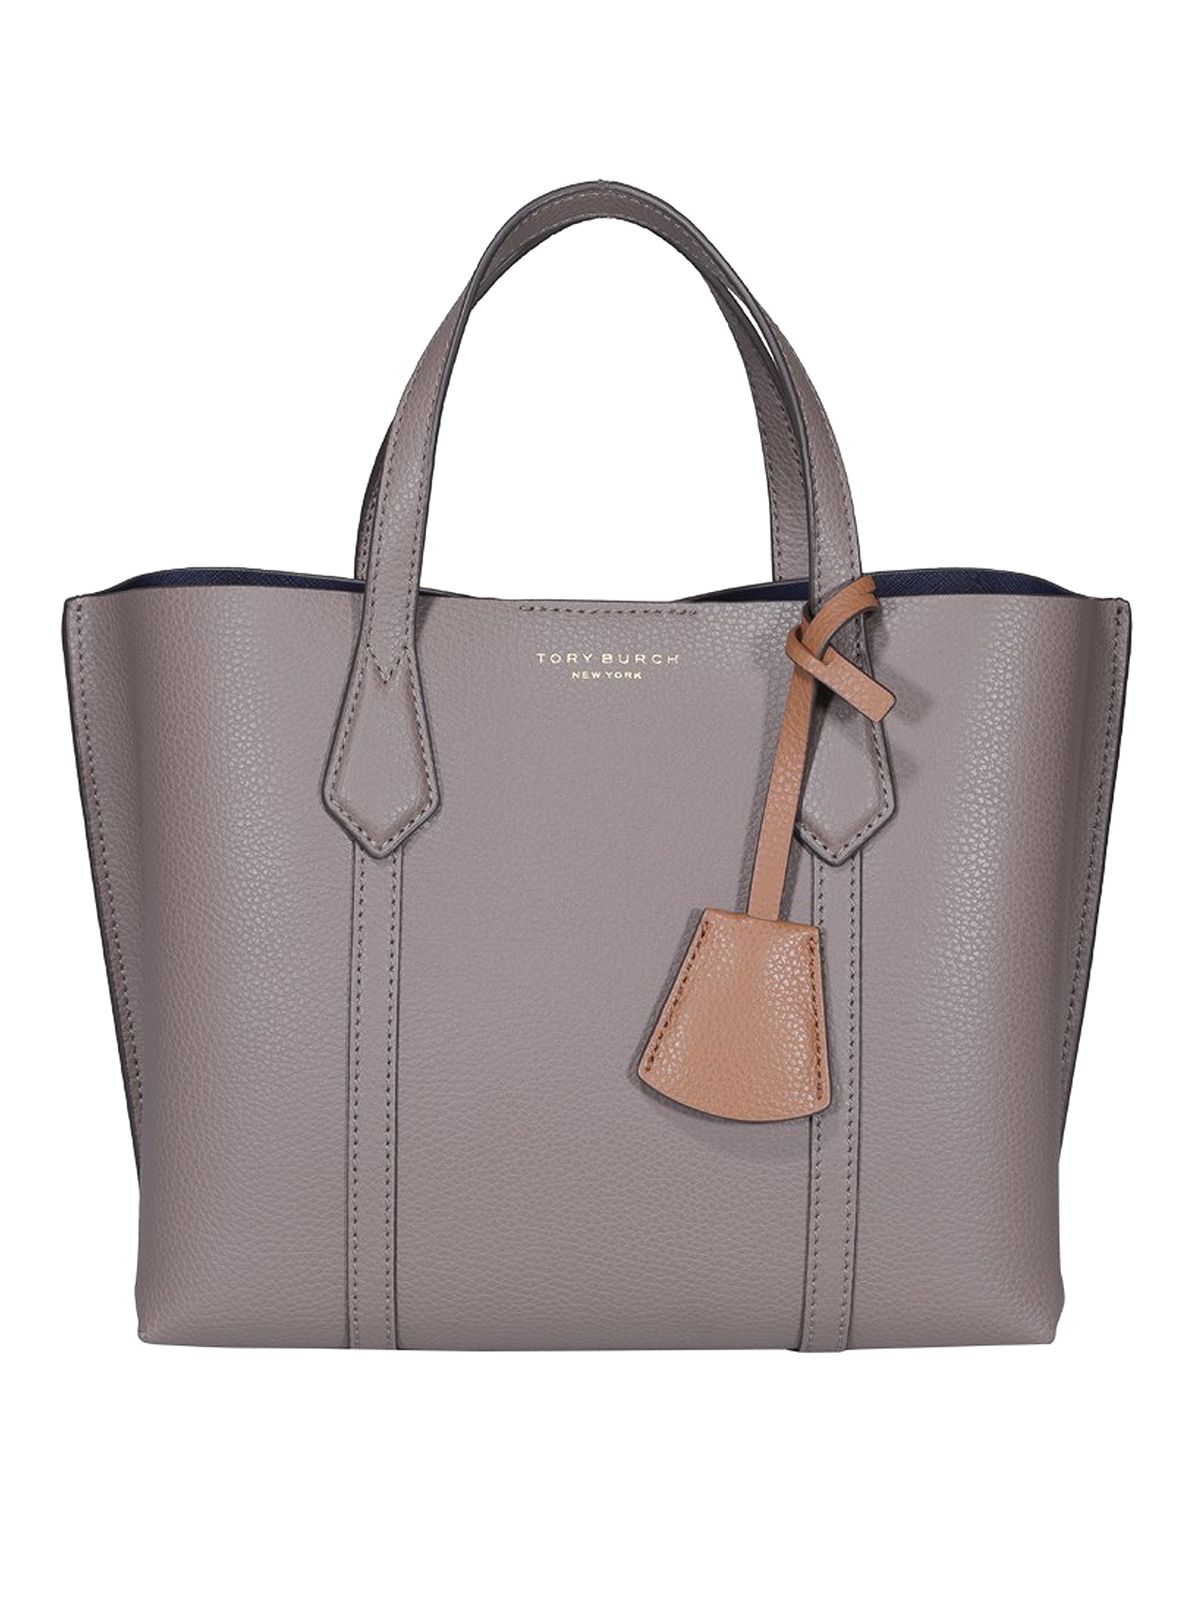 Tory Burch Leather Tote In Grey